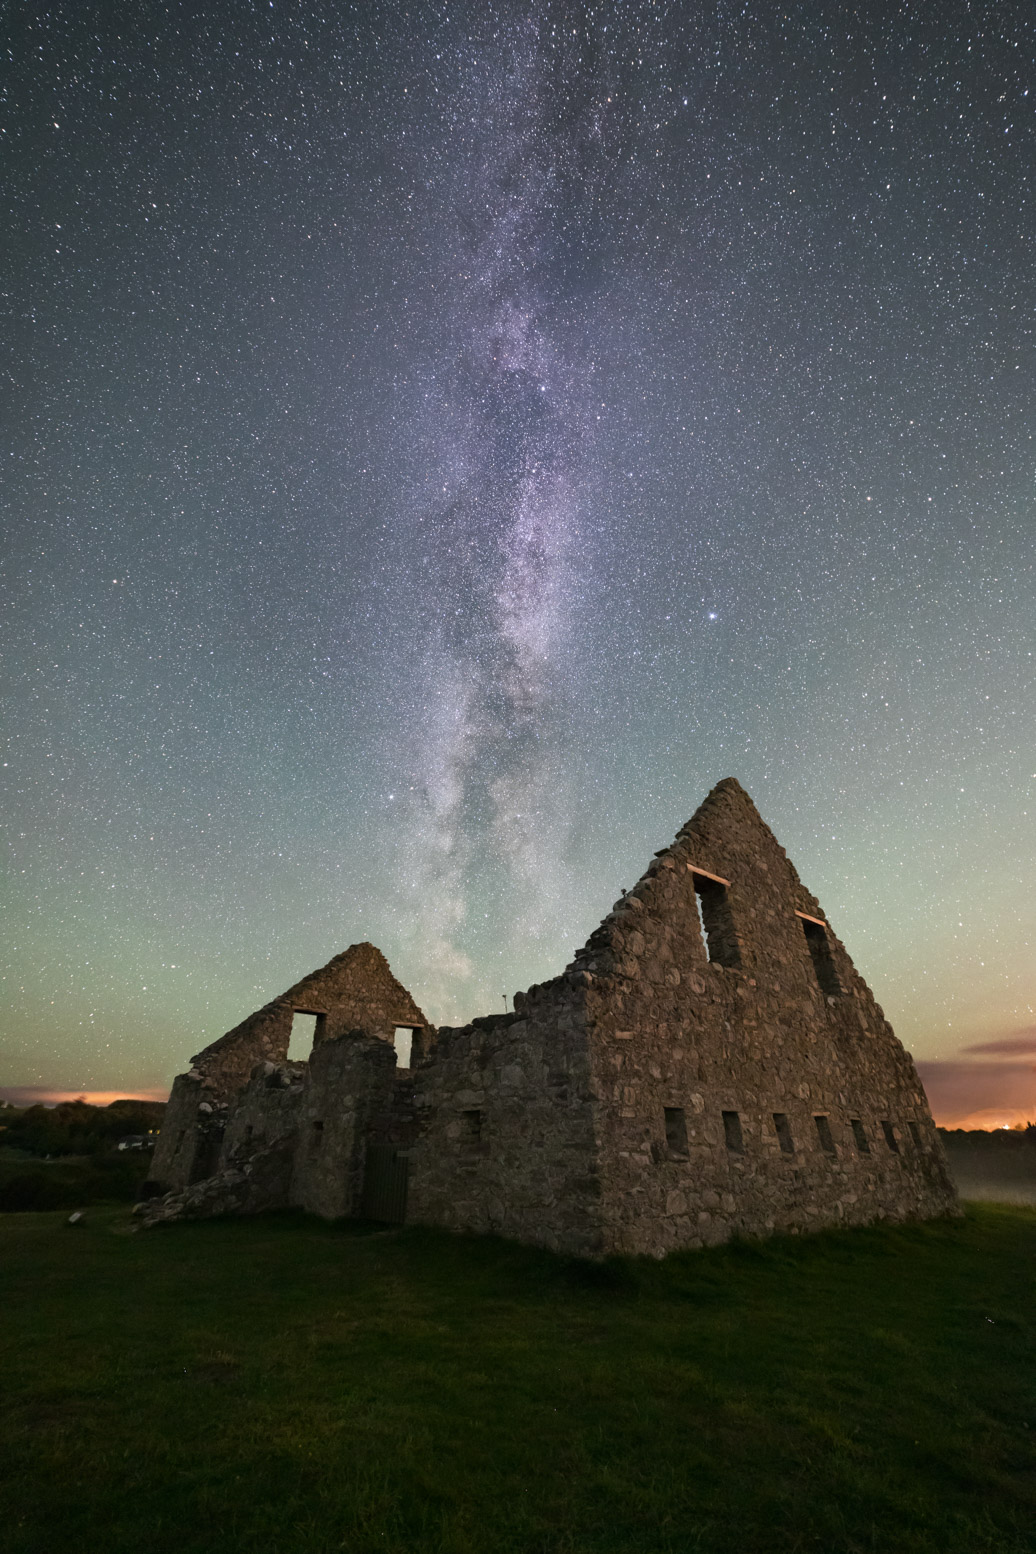 A favourite from a lovely night spent photographing the Milky Way at Ruthven Barracks in the Cairngorms, in August 2022. This was taken late in the evening, around midnight, with the Milky way rising up as if smoke from a long disused chimmney. This hangs on my wall as one of my favourite photos.